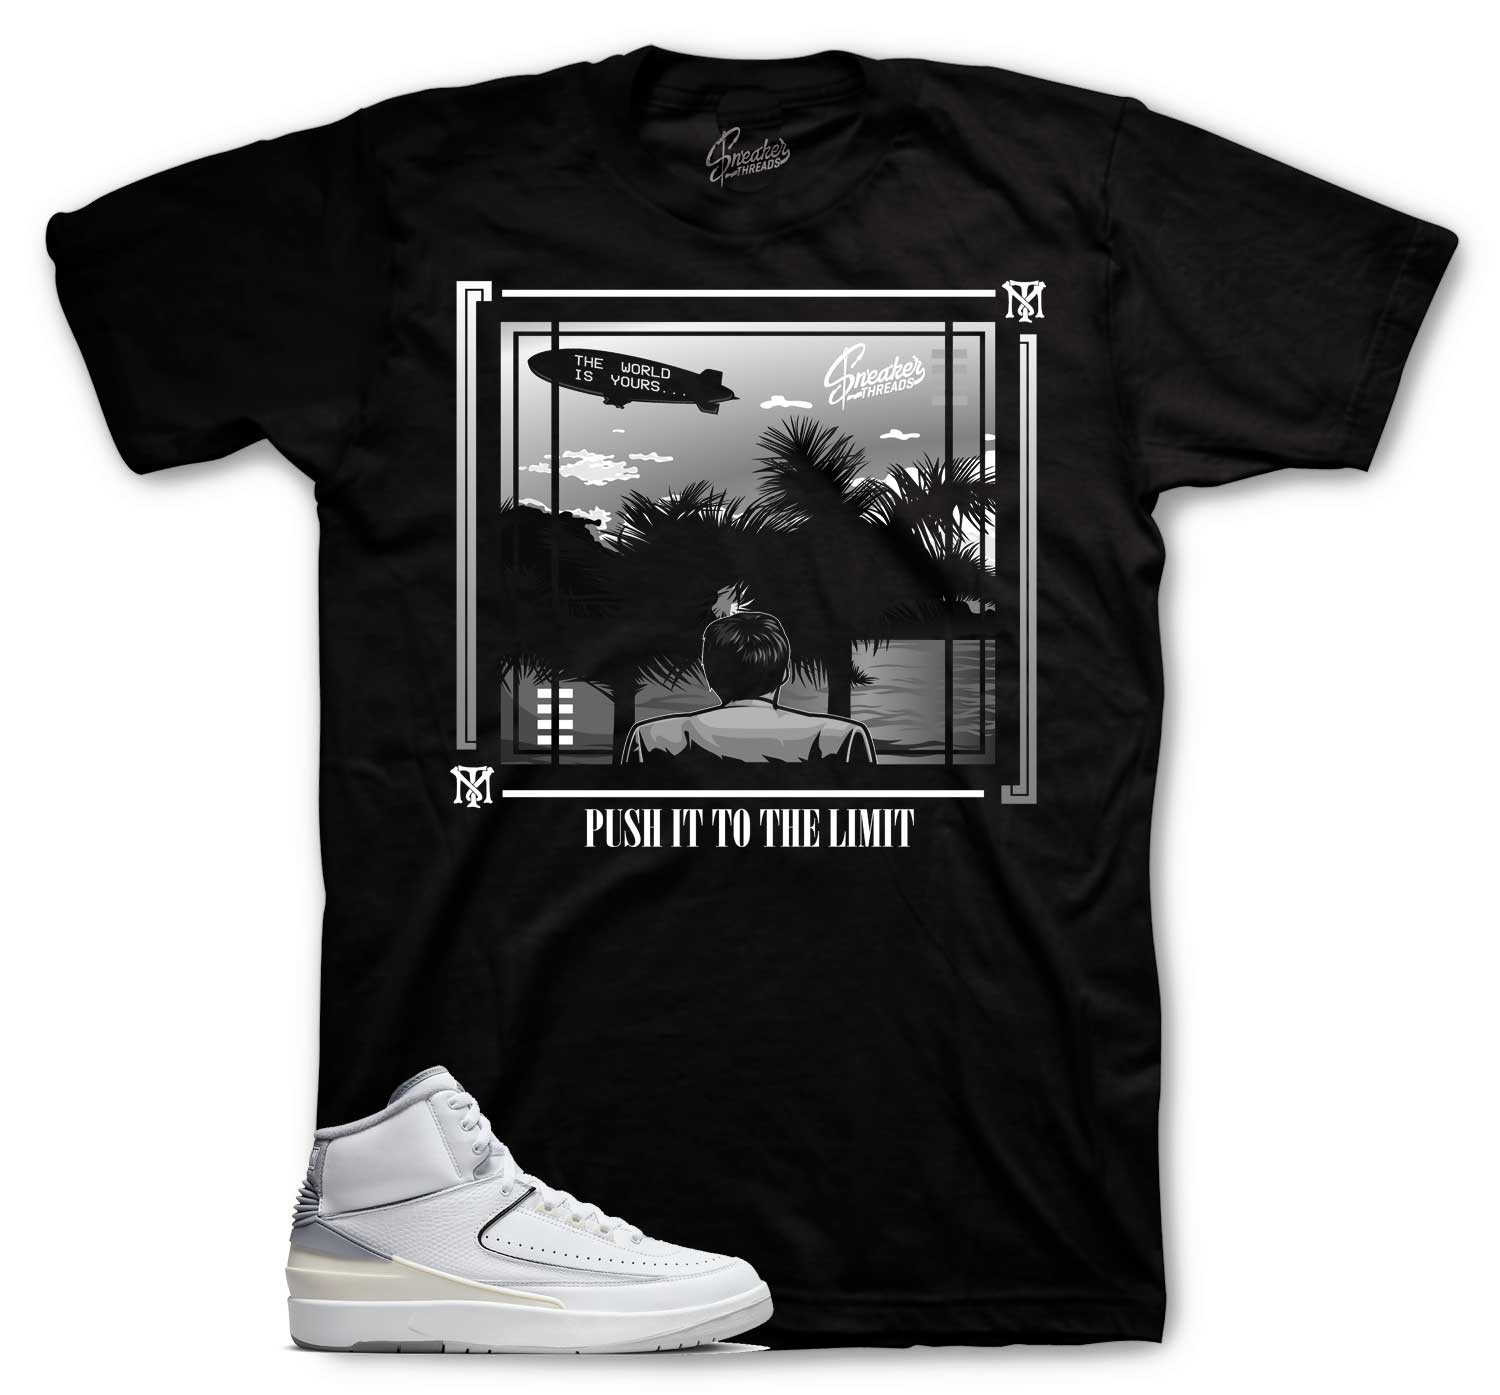 Retro 2 Cement Grey Shirt - World Is Yours - Black